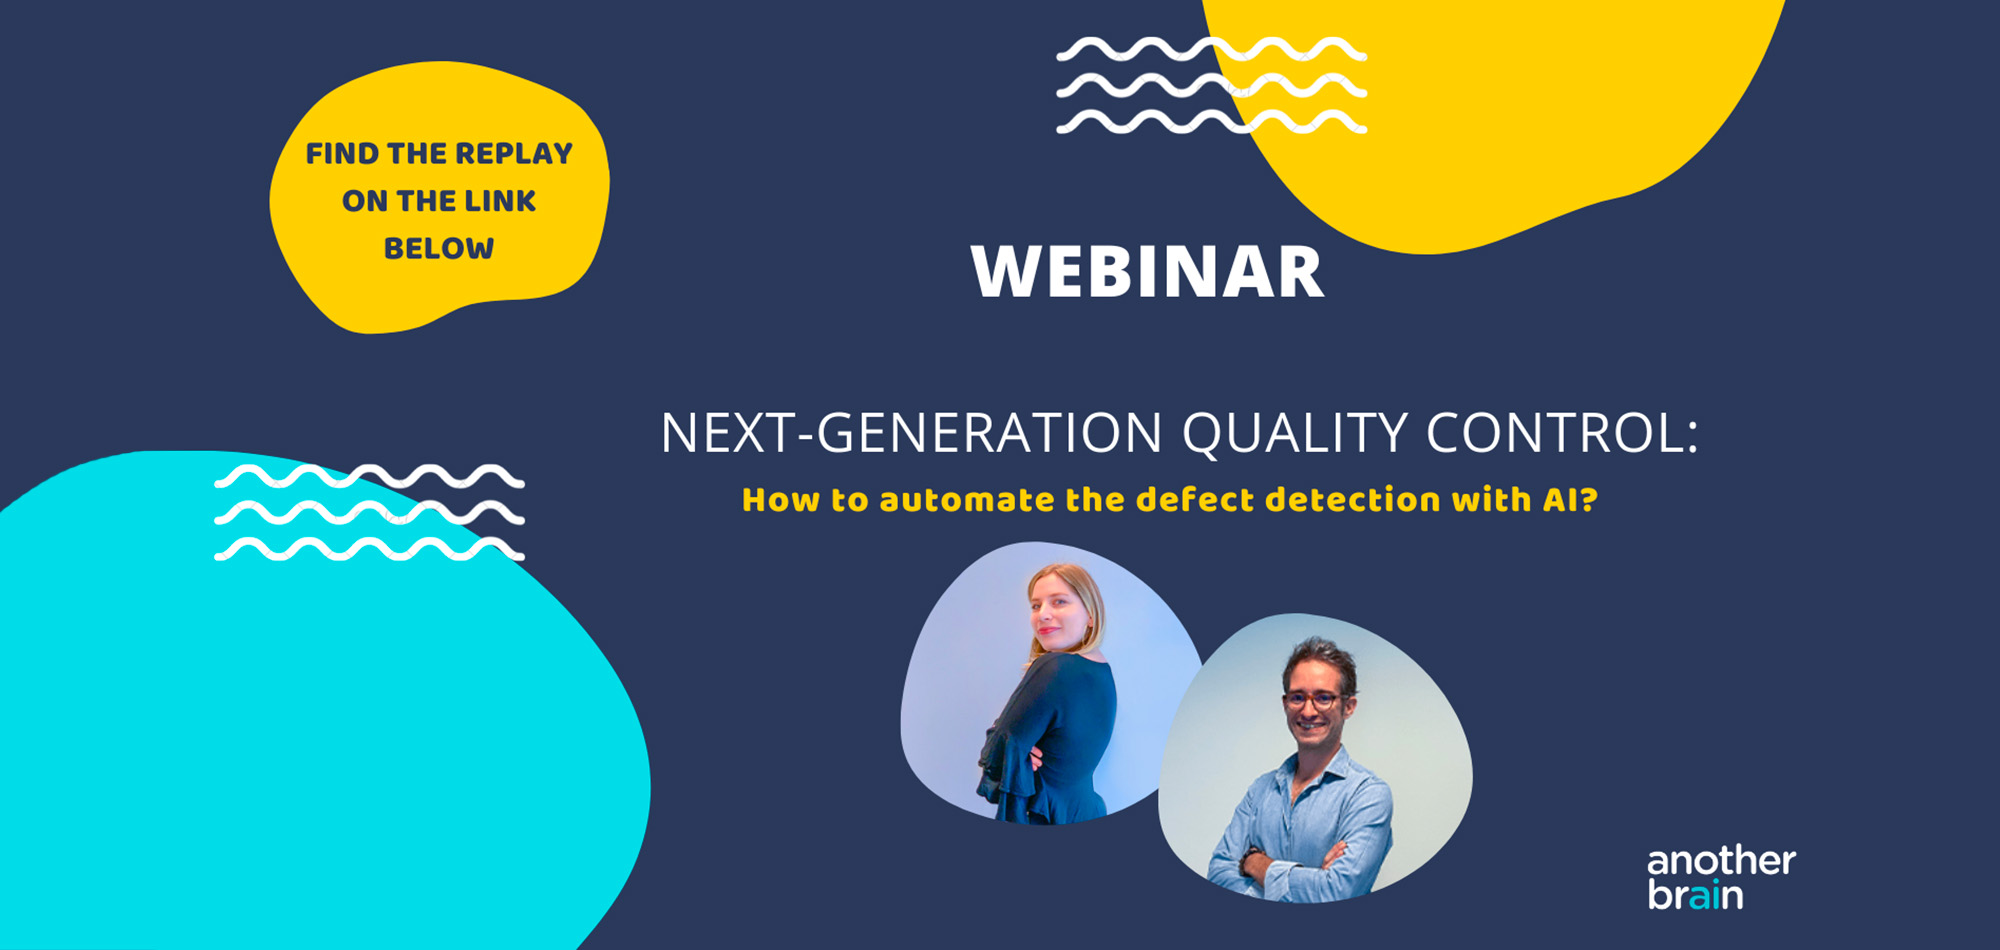 News webinar new generation of quality control - AnotherBrain